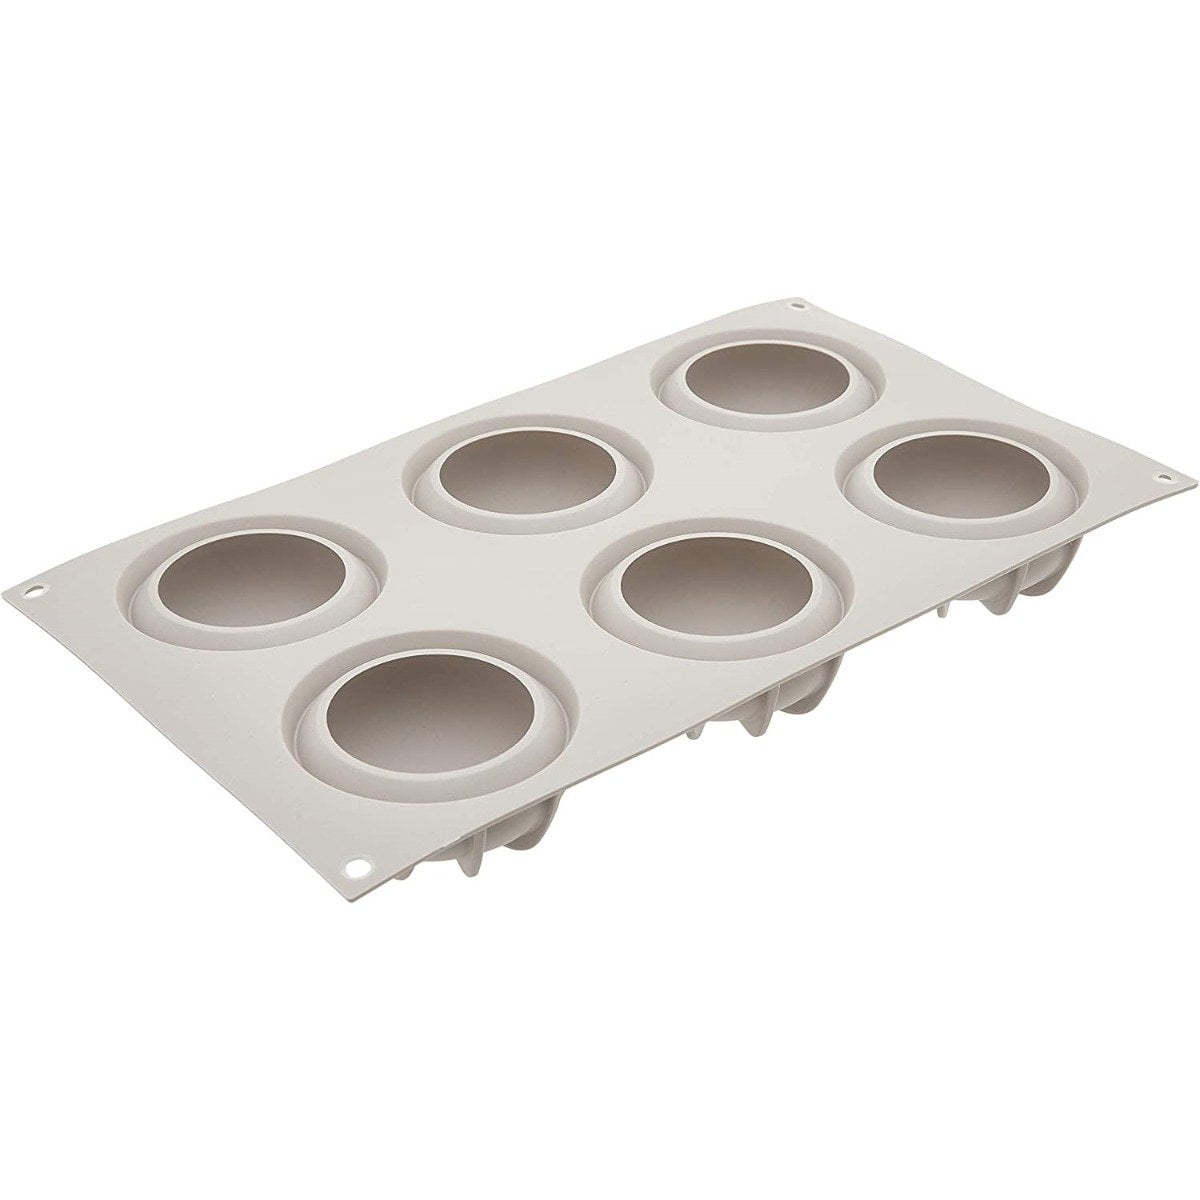 6 Pack: Heart Silicone Candy Mold by Celebrate It®